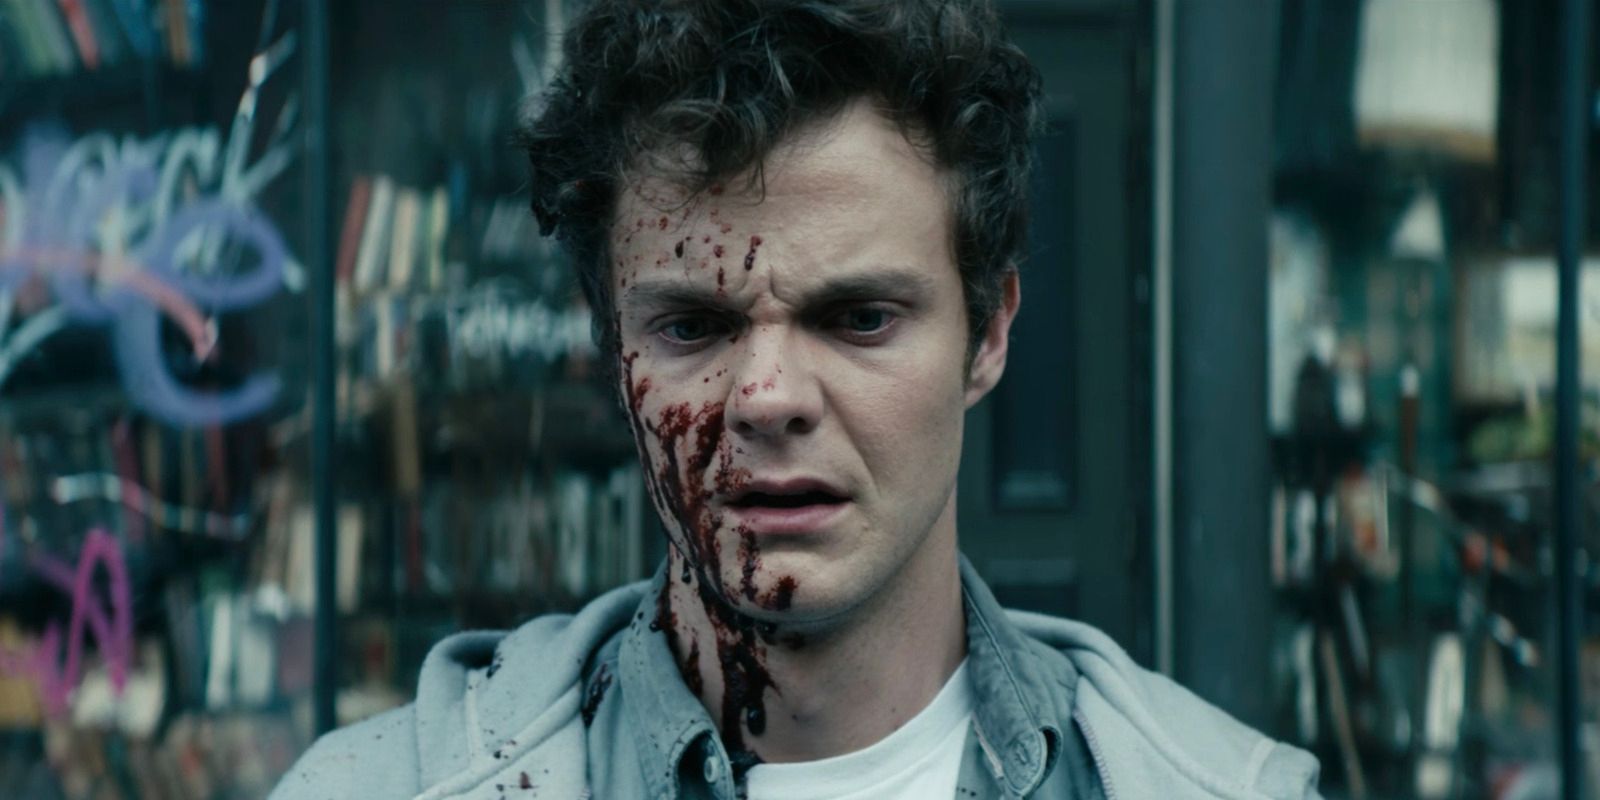 Jack Quaid as Hughie Campbell looking confused and upset with blood on his face in The Boys